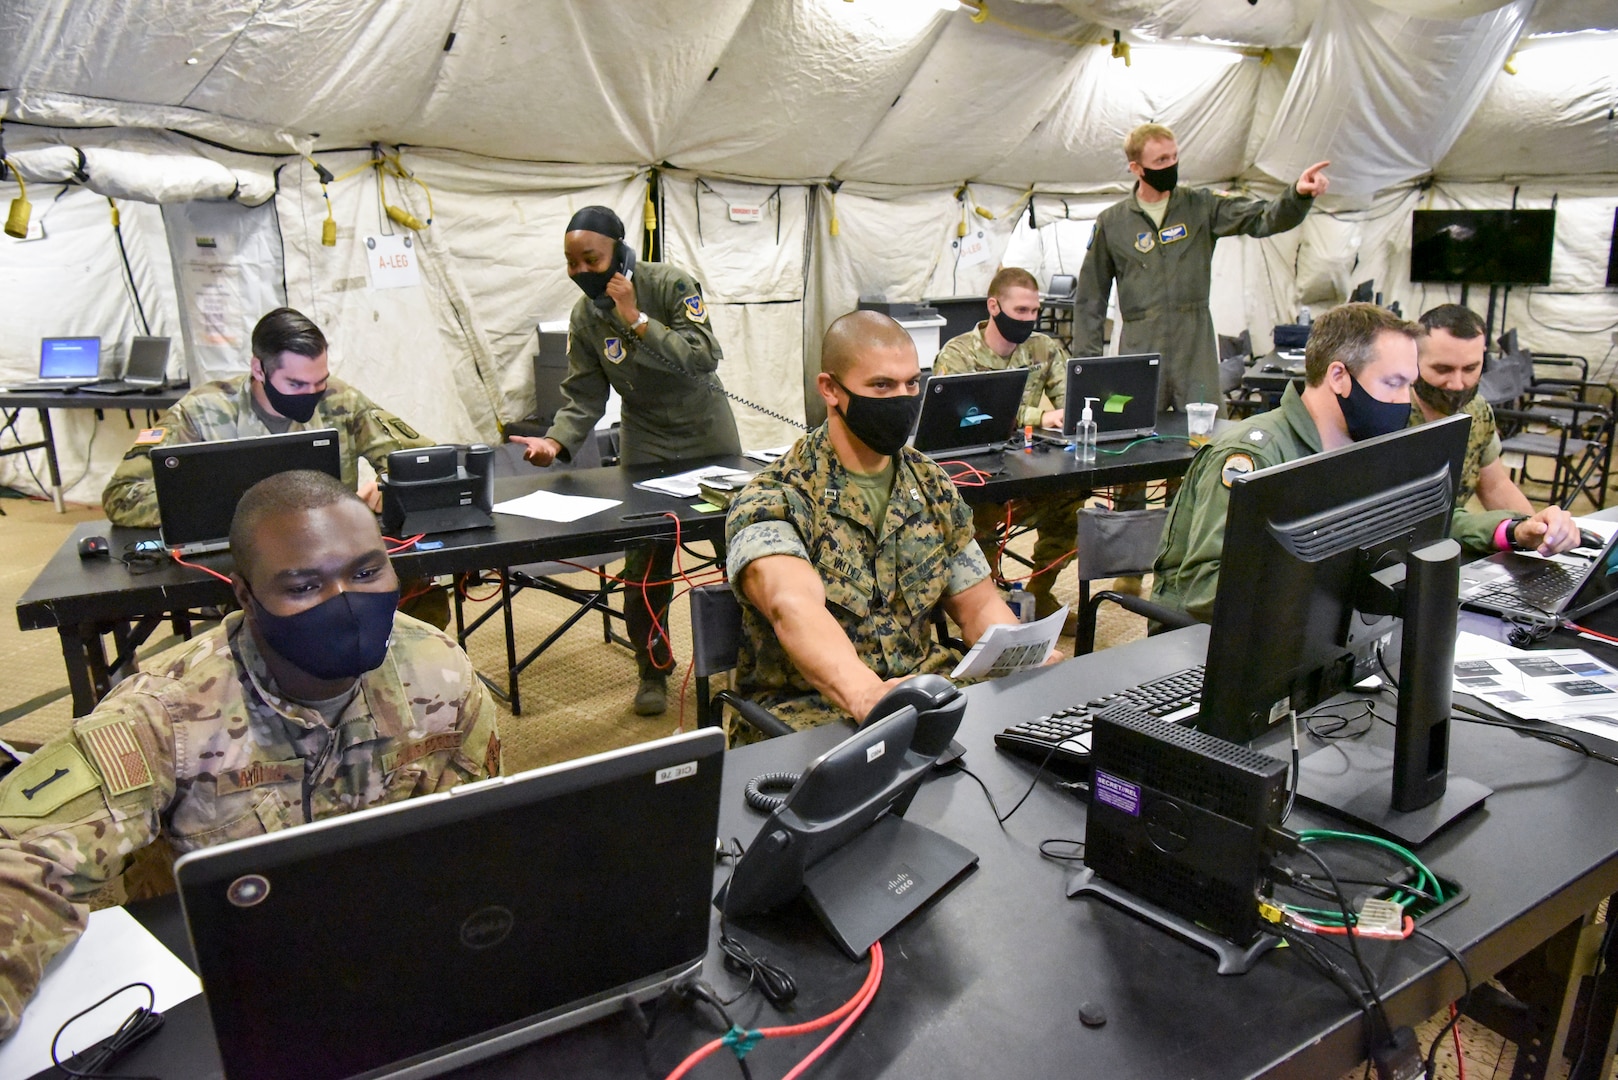 IMAGE: PEARL HARBOR (Sep. 23, 2020) Service members from the U.S. Navy, U.S. Marine Corps, U.S. Air Force, and U.S. Army work together in the Multi-domain Operations Center - Forward (MDOC-F) during exercise Valiant Shield 2020. Meanwhile, a team of Naval Surface Warfare Center Dahlgren Division (NSWCDD) scientists and engineers worked from two locations – Dahlgren, Va., and Honolulu, Hawaii – to ensure the success of this year’s Valiant Shield exercise. “Our biggest strategic accomplishment was supporting live forces, both afloat and at terrestrial sites, using a combined in-person and local operations team,” said Joseph Pack, NSWCDD deputy director for expeditionary warfare, regarding Dahlgren’s impact on the exercise that focuses on the integration of joint training in a blue-water environment among U.S. forces.  (U.S. Navy photo by Mass Communication Specialist 1st Class Nate Laird/Released)